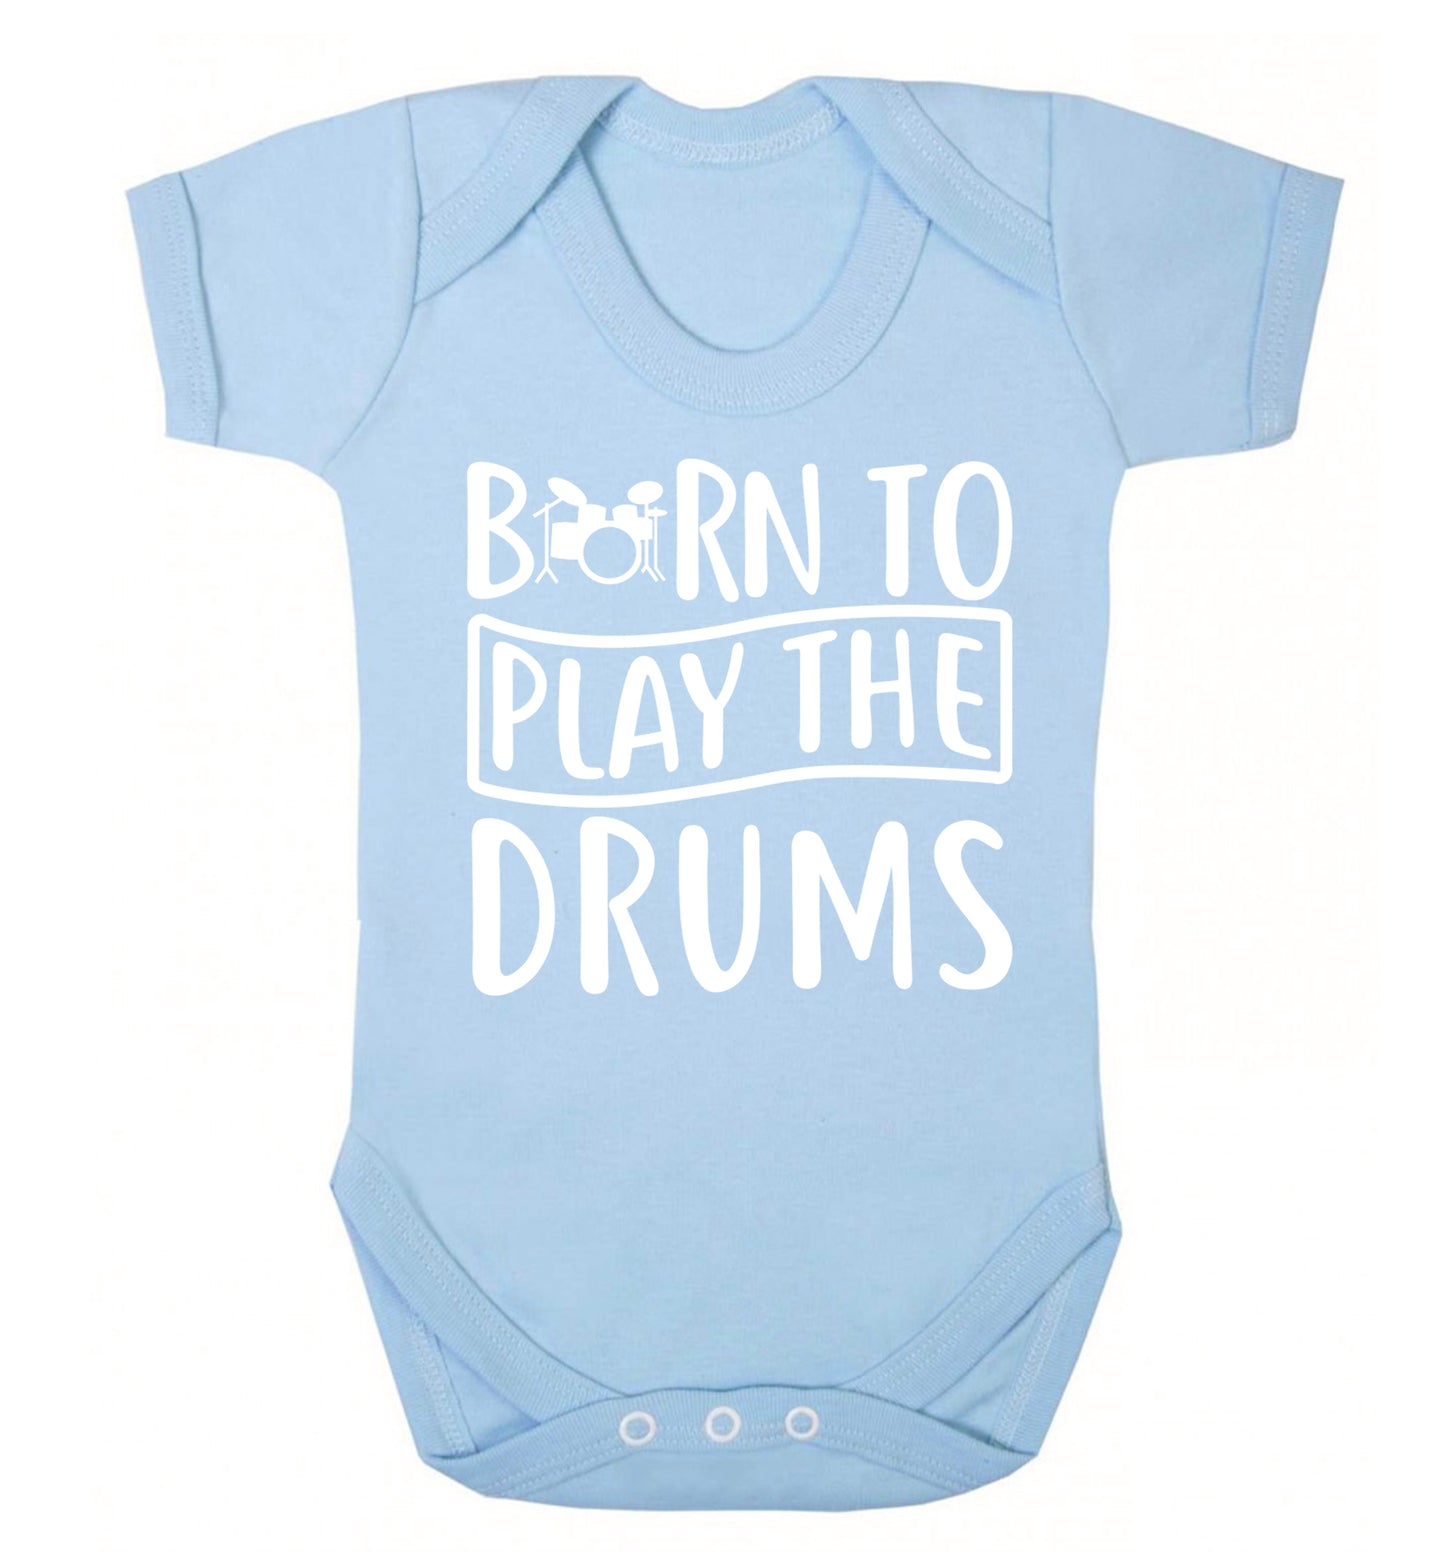 Born to play the drums Baby Vest pale blue 18-24 months